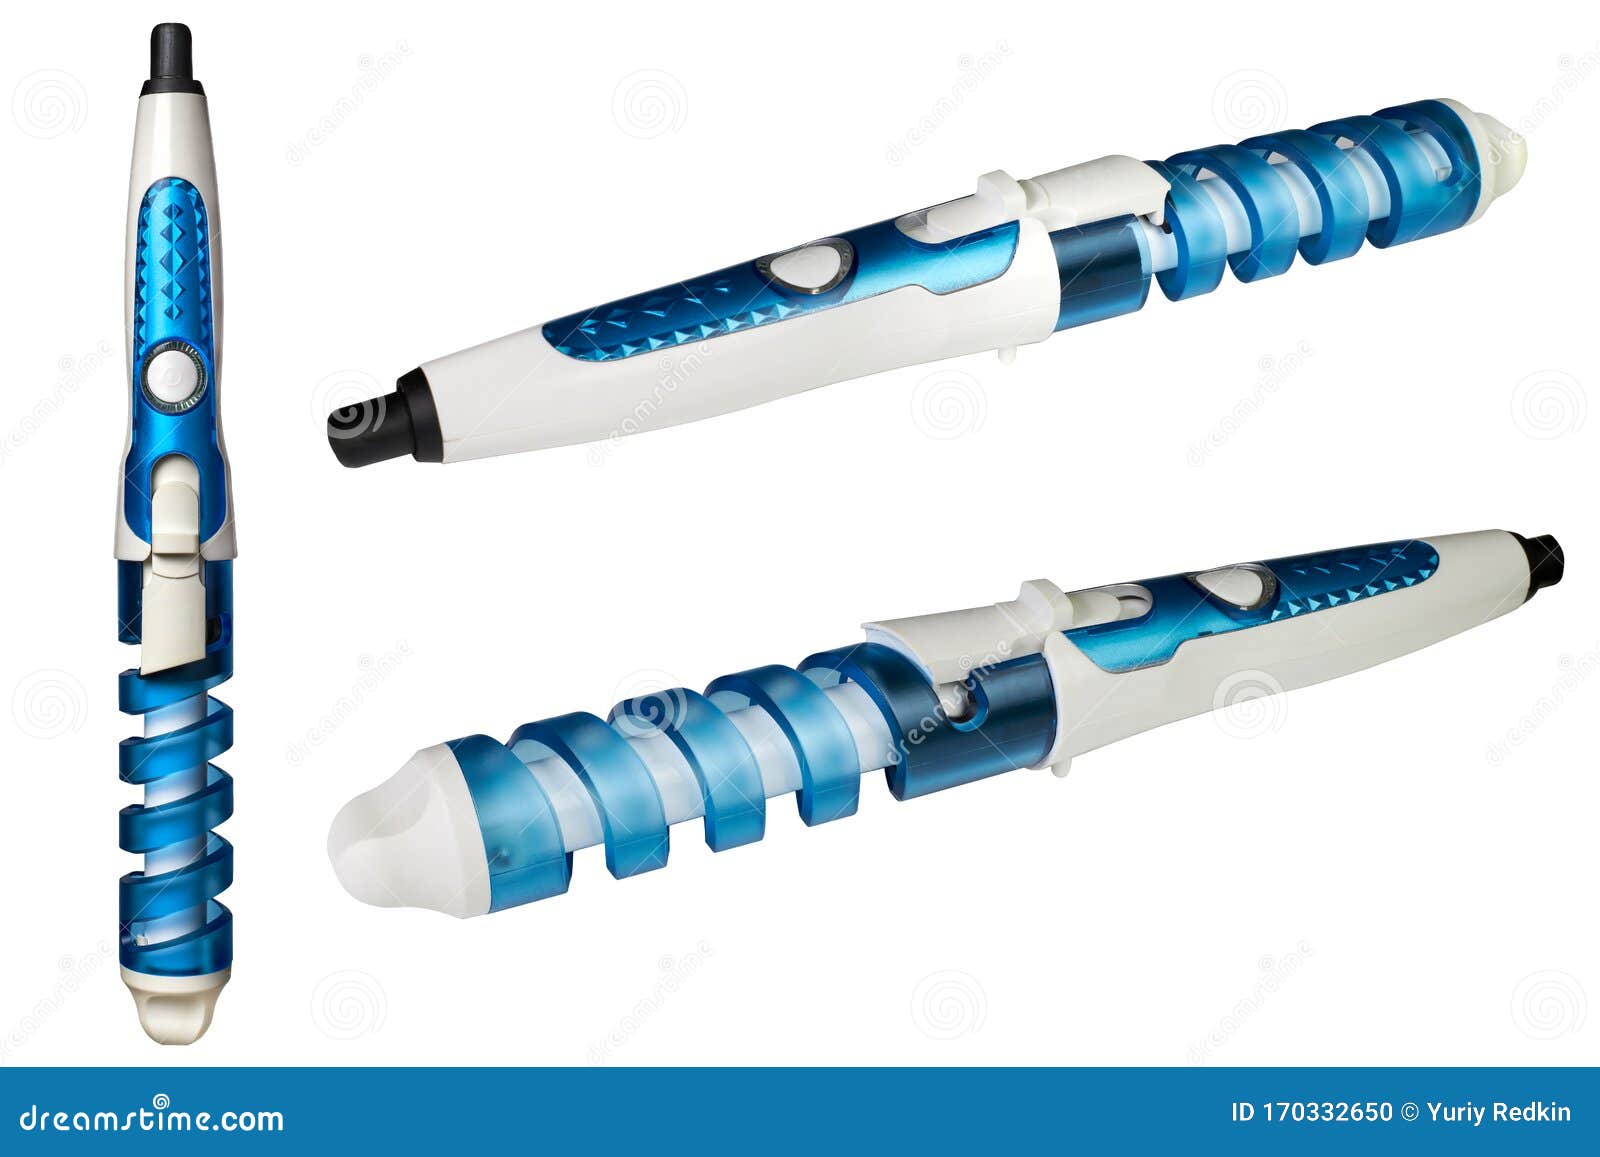 Electric Spiral Hair Curlers in Different Angles Isolated on a White  Background Stock Photo - Image of white, household: 170332650